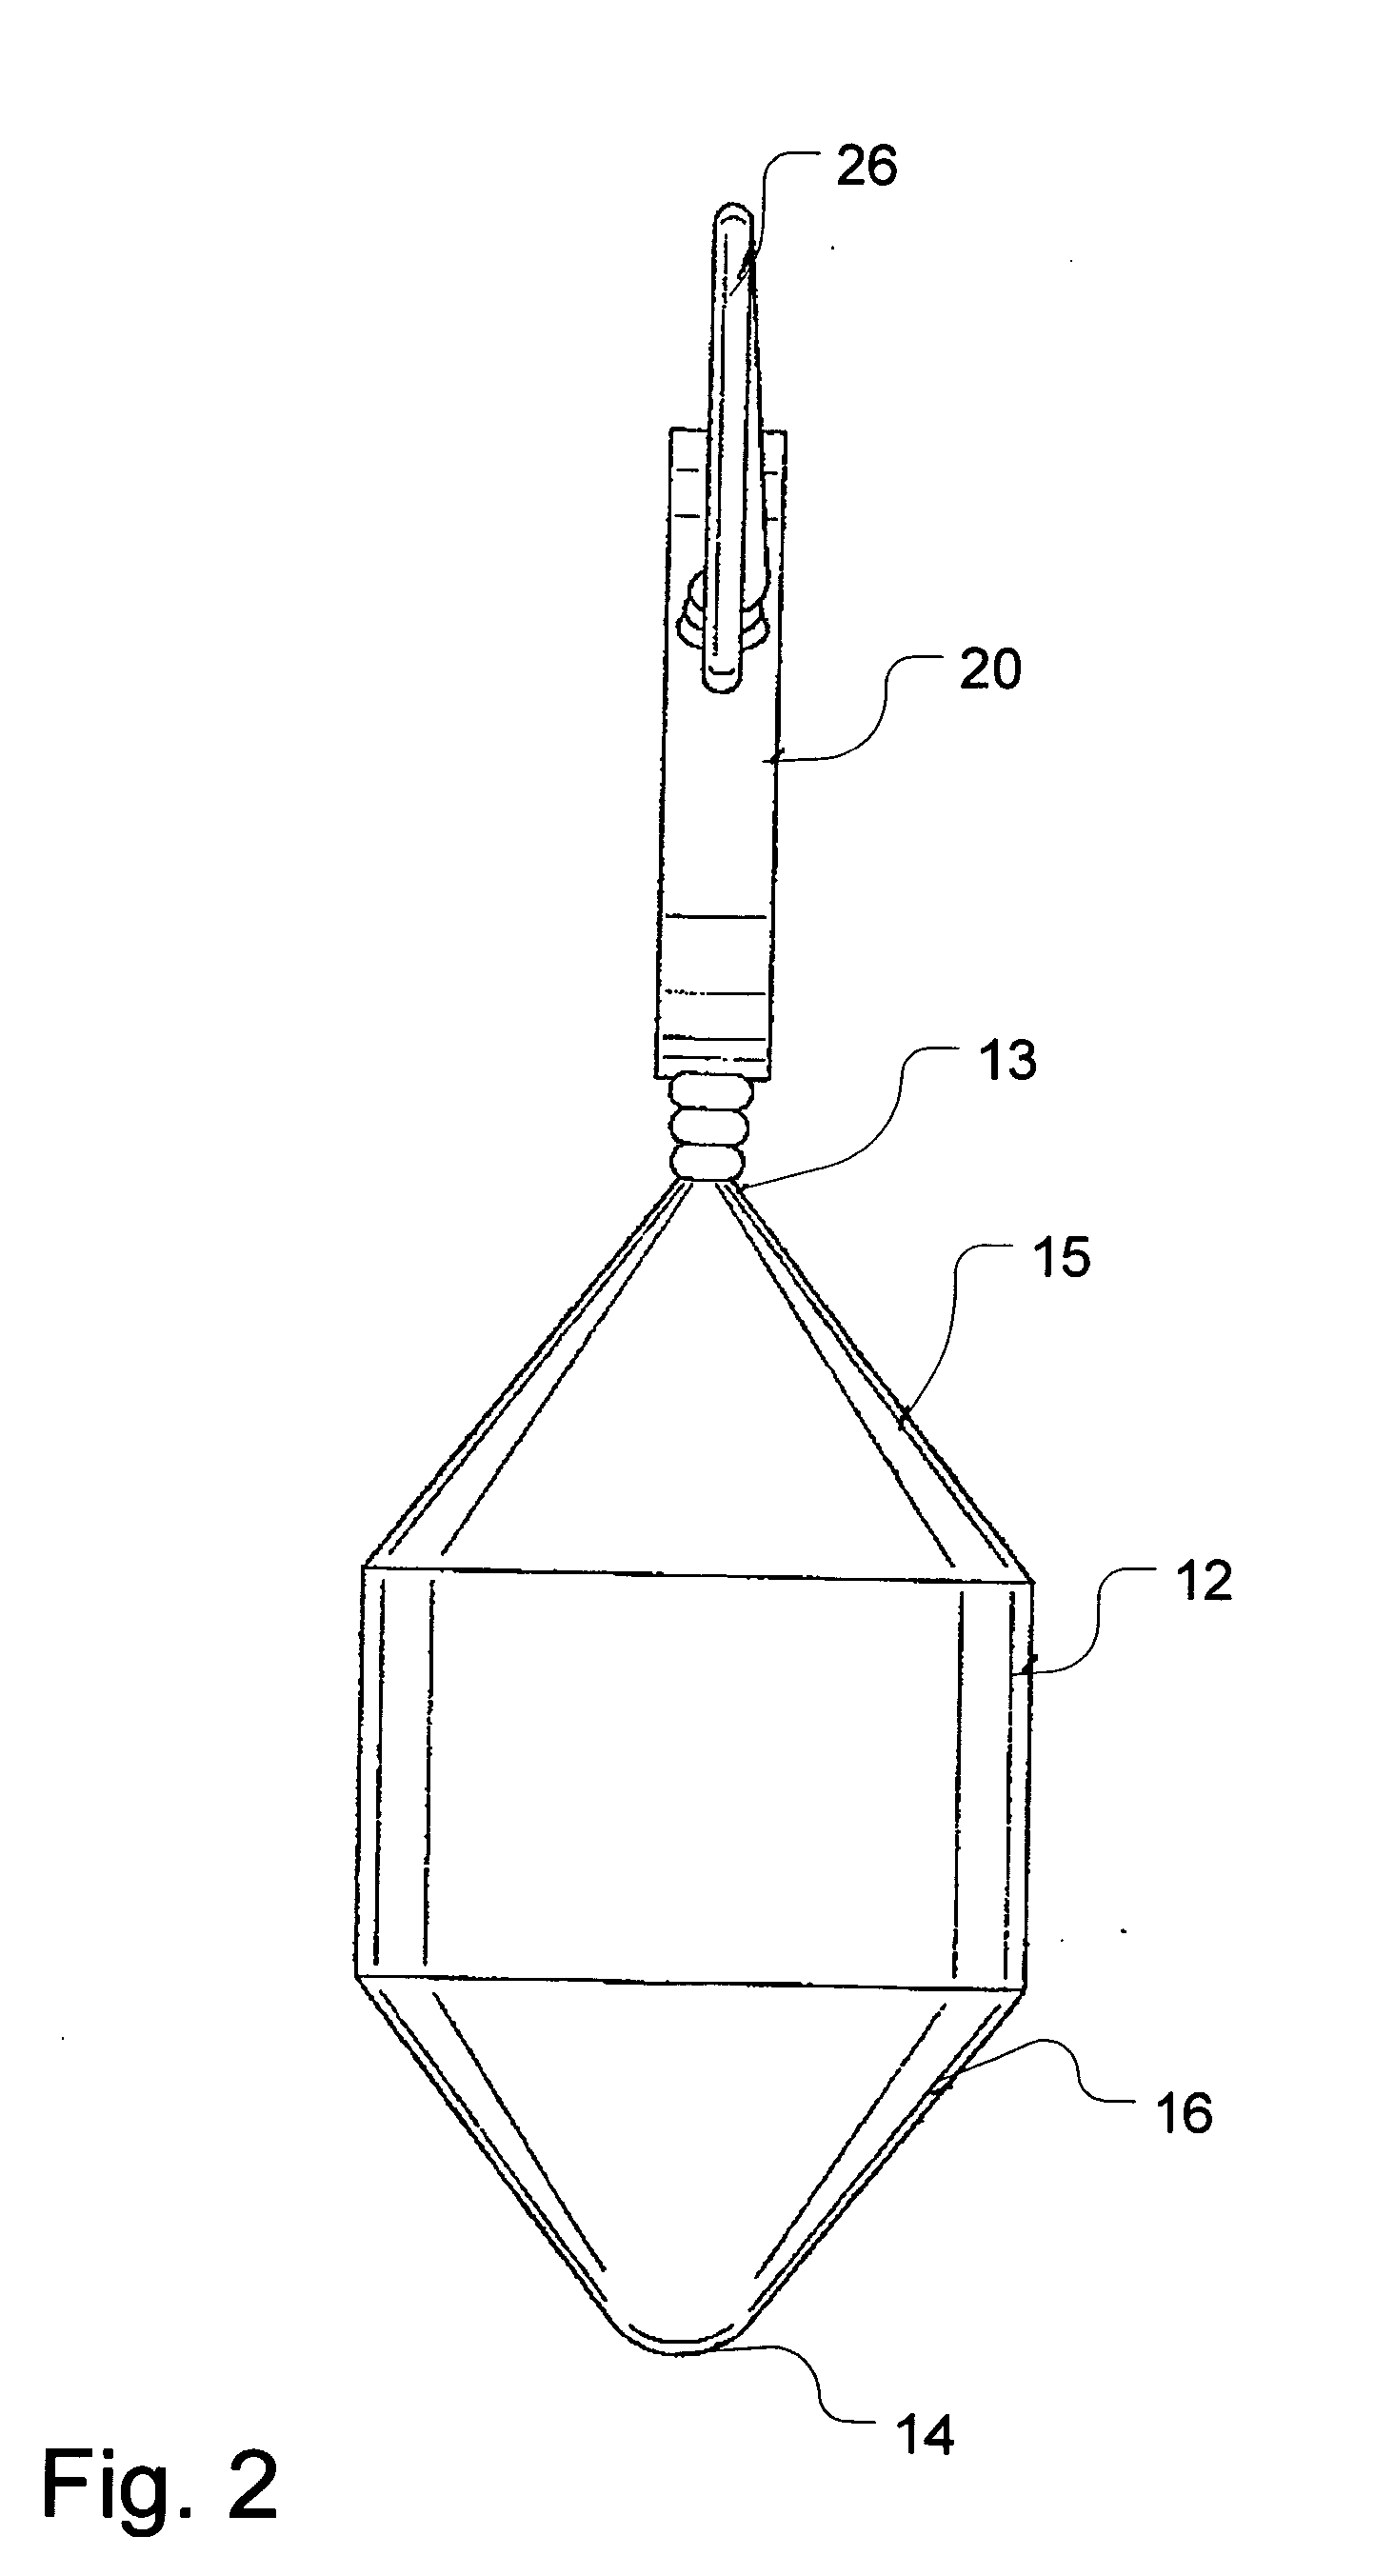 Fish luring device